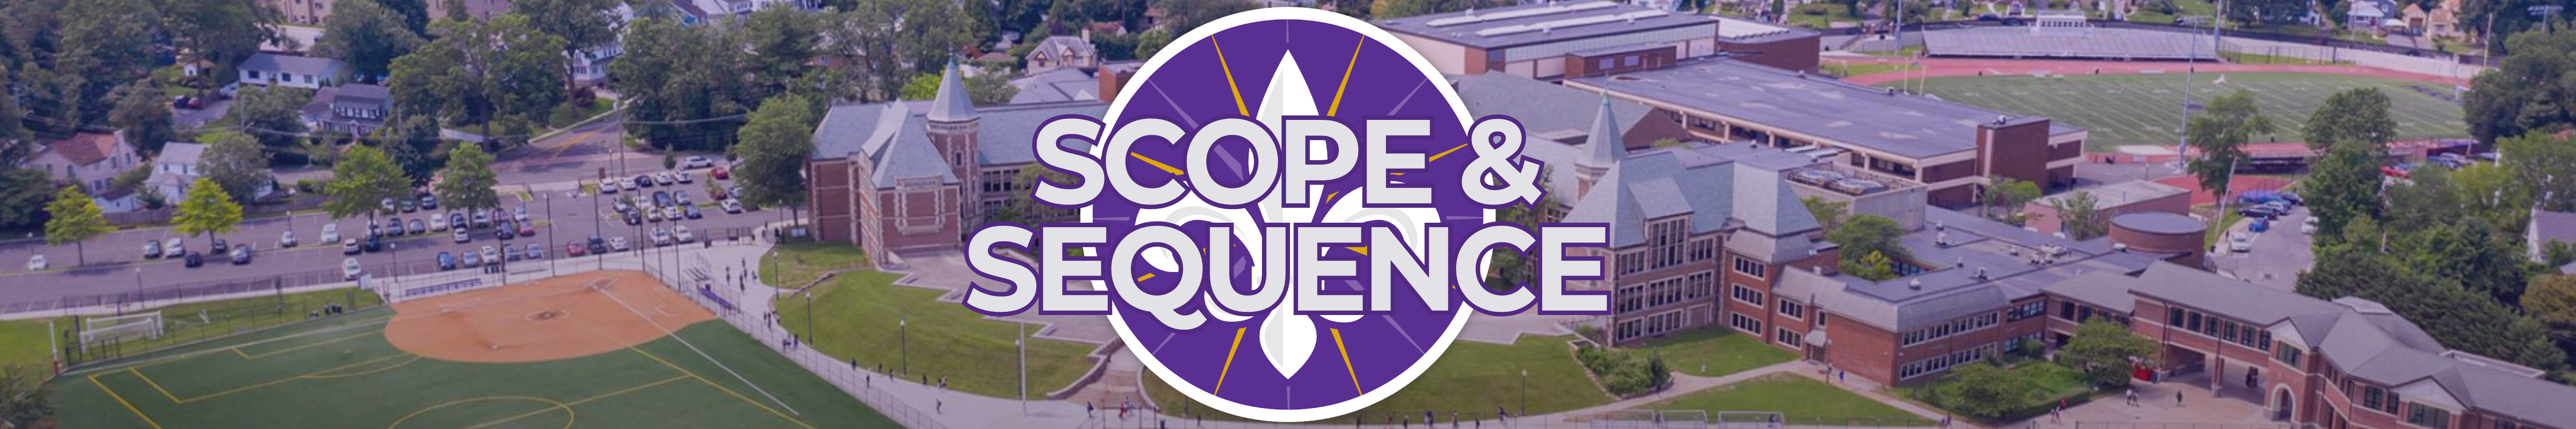 scope and sequence banner